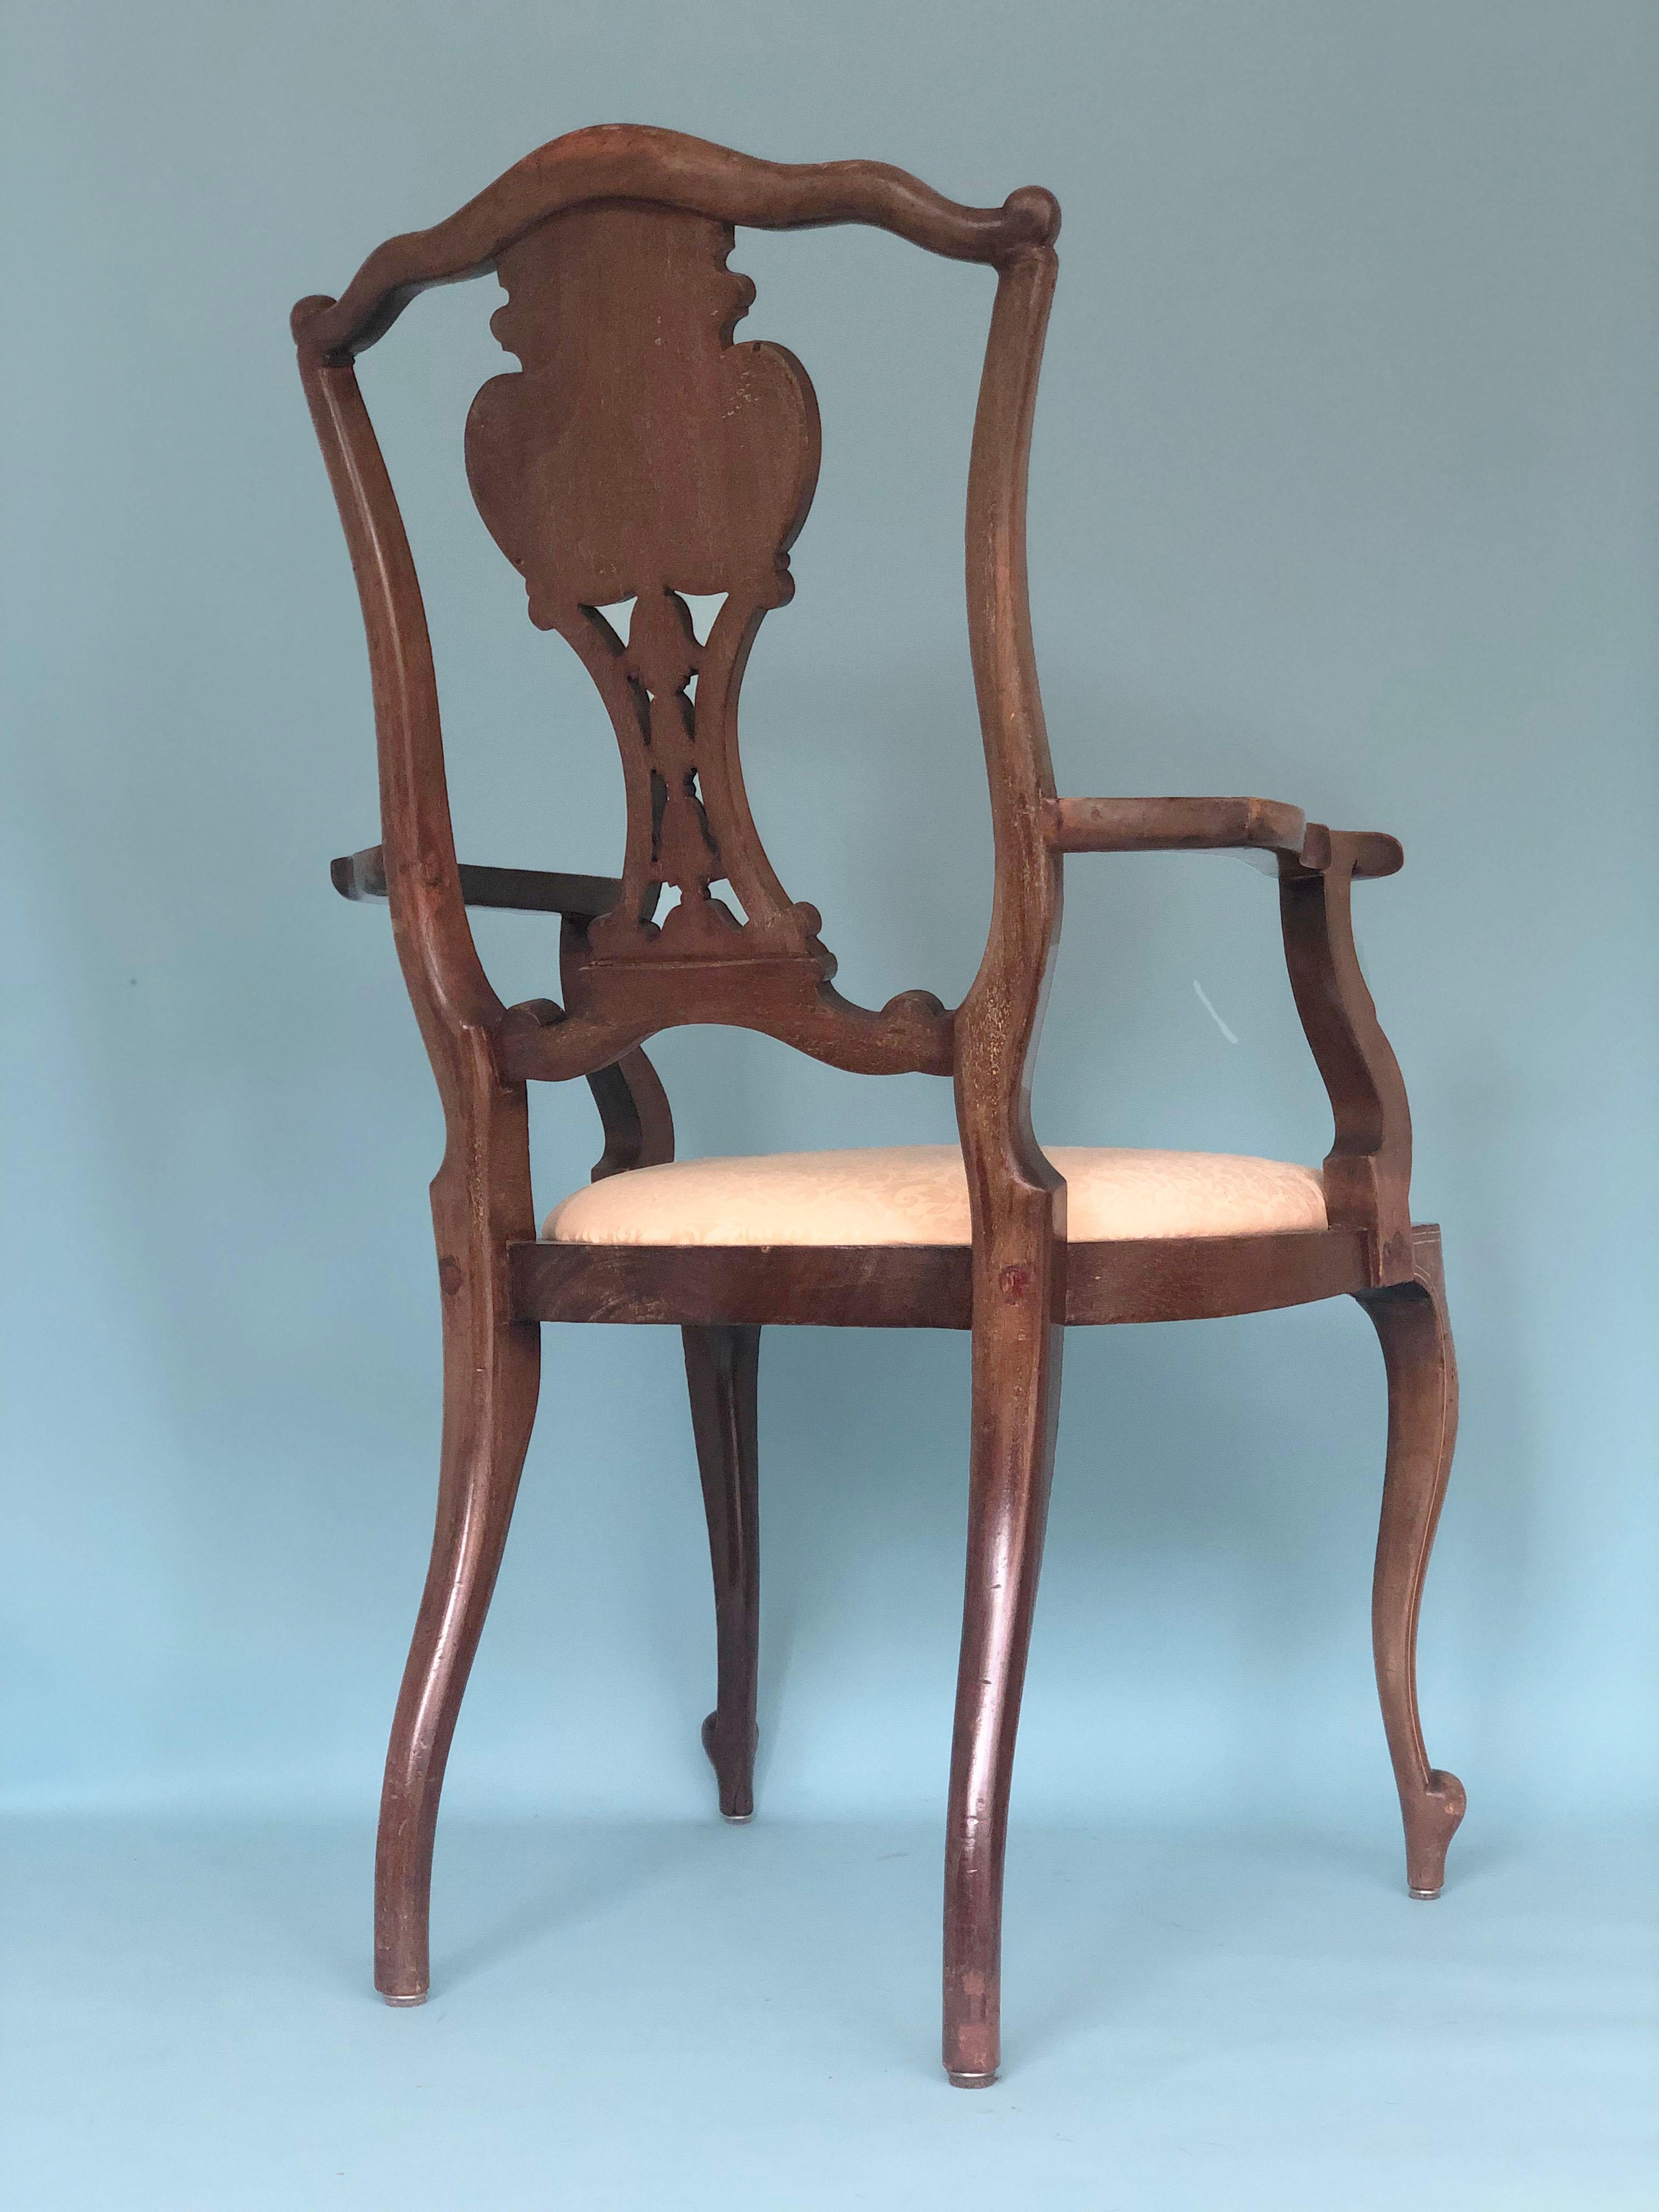 A Victorian Chippendale Revival armchair in mahogany from the late 19th century. The handmade decoration in the back has a mosaic of inlaid bone and satinwood. The seating is covered with a cream fabric with a pattern.

Object: Armchair
Design: